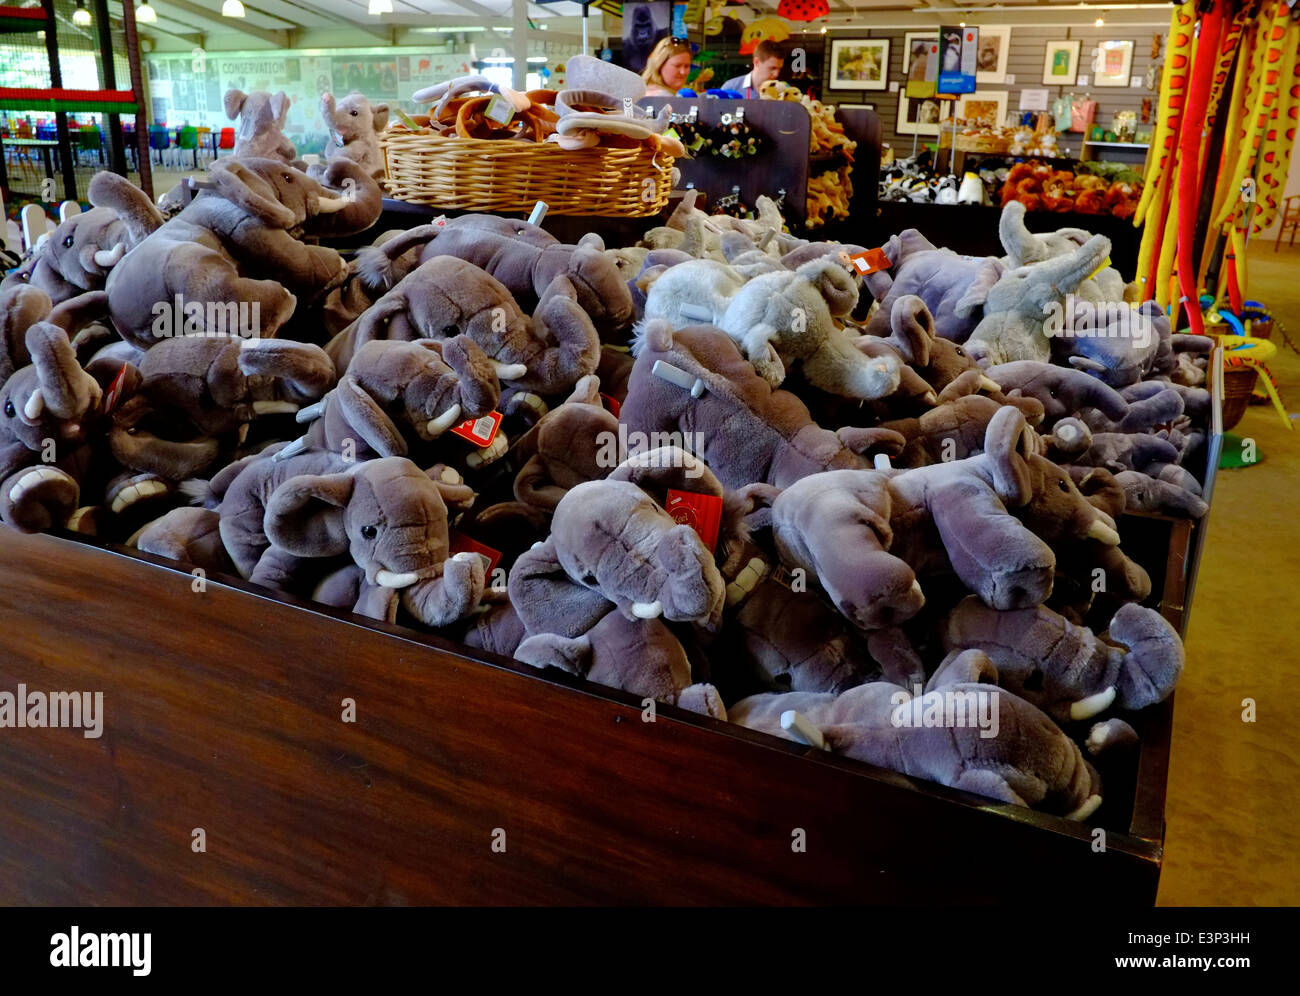 Cuddly toy Elephants stacked up in a Zoo gift shop. Twycross Zoo England UK Stock Photo